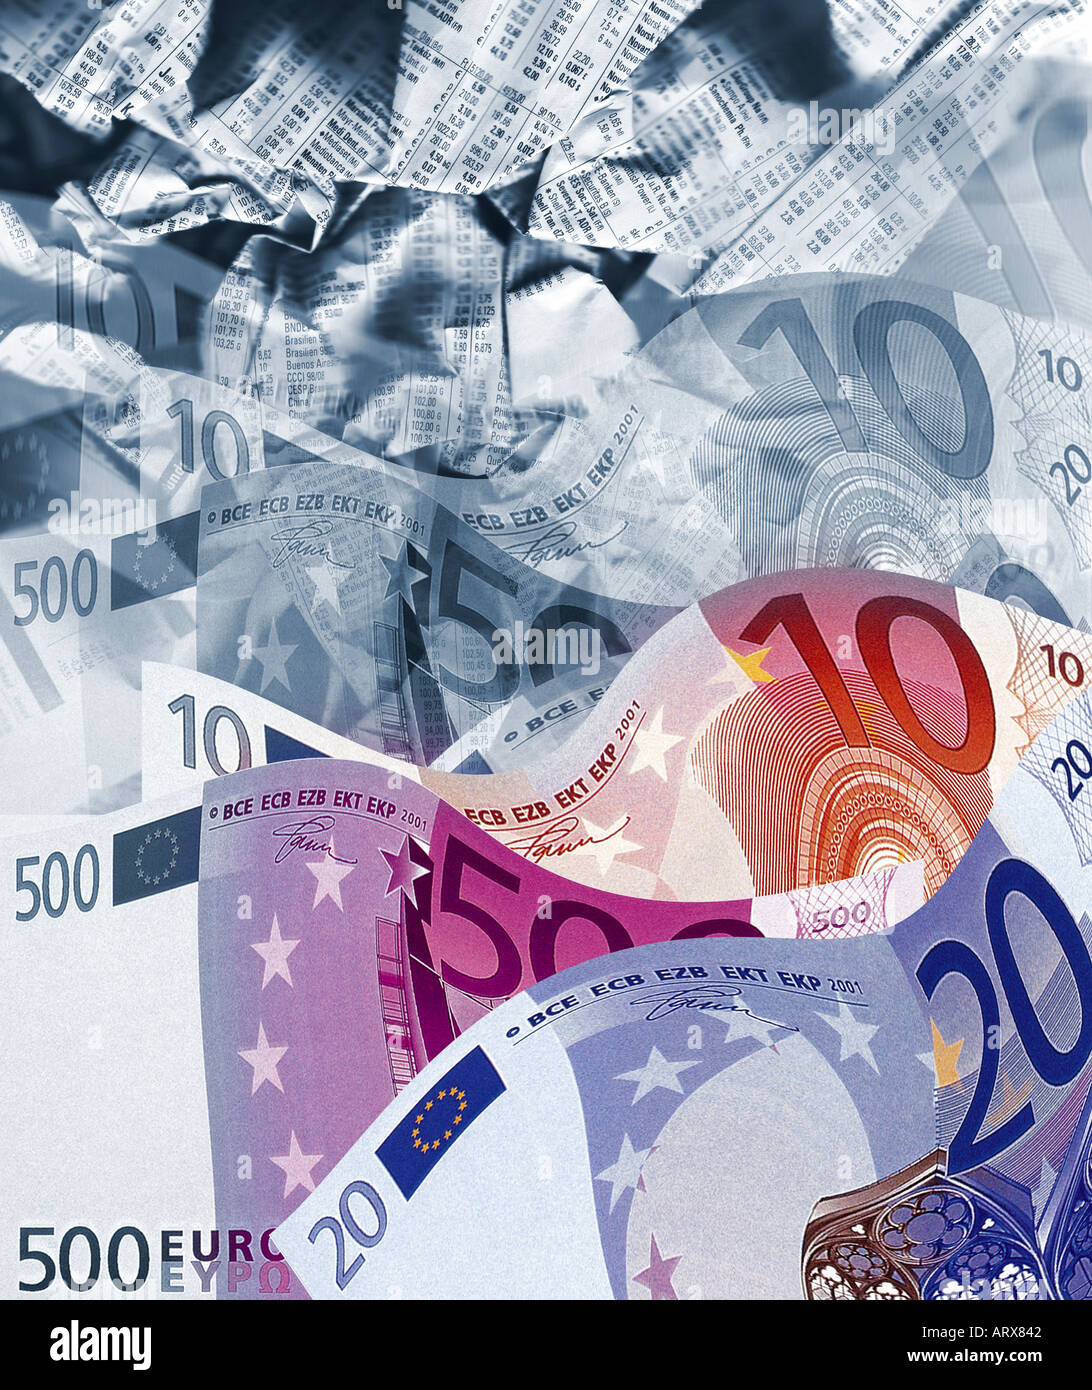 FINANCIAL CONCEPT: Euro Currency Stock Photo